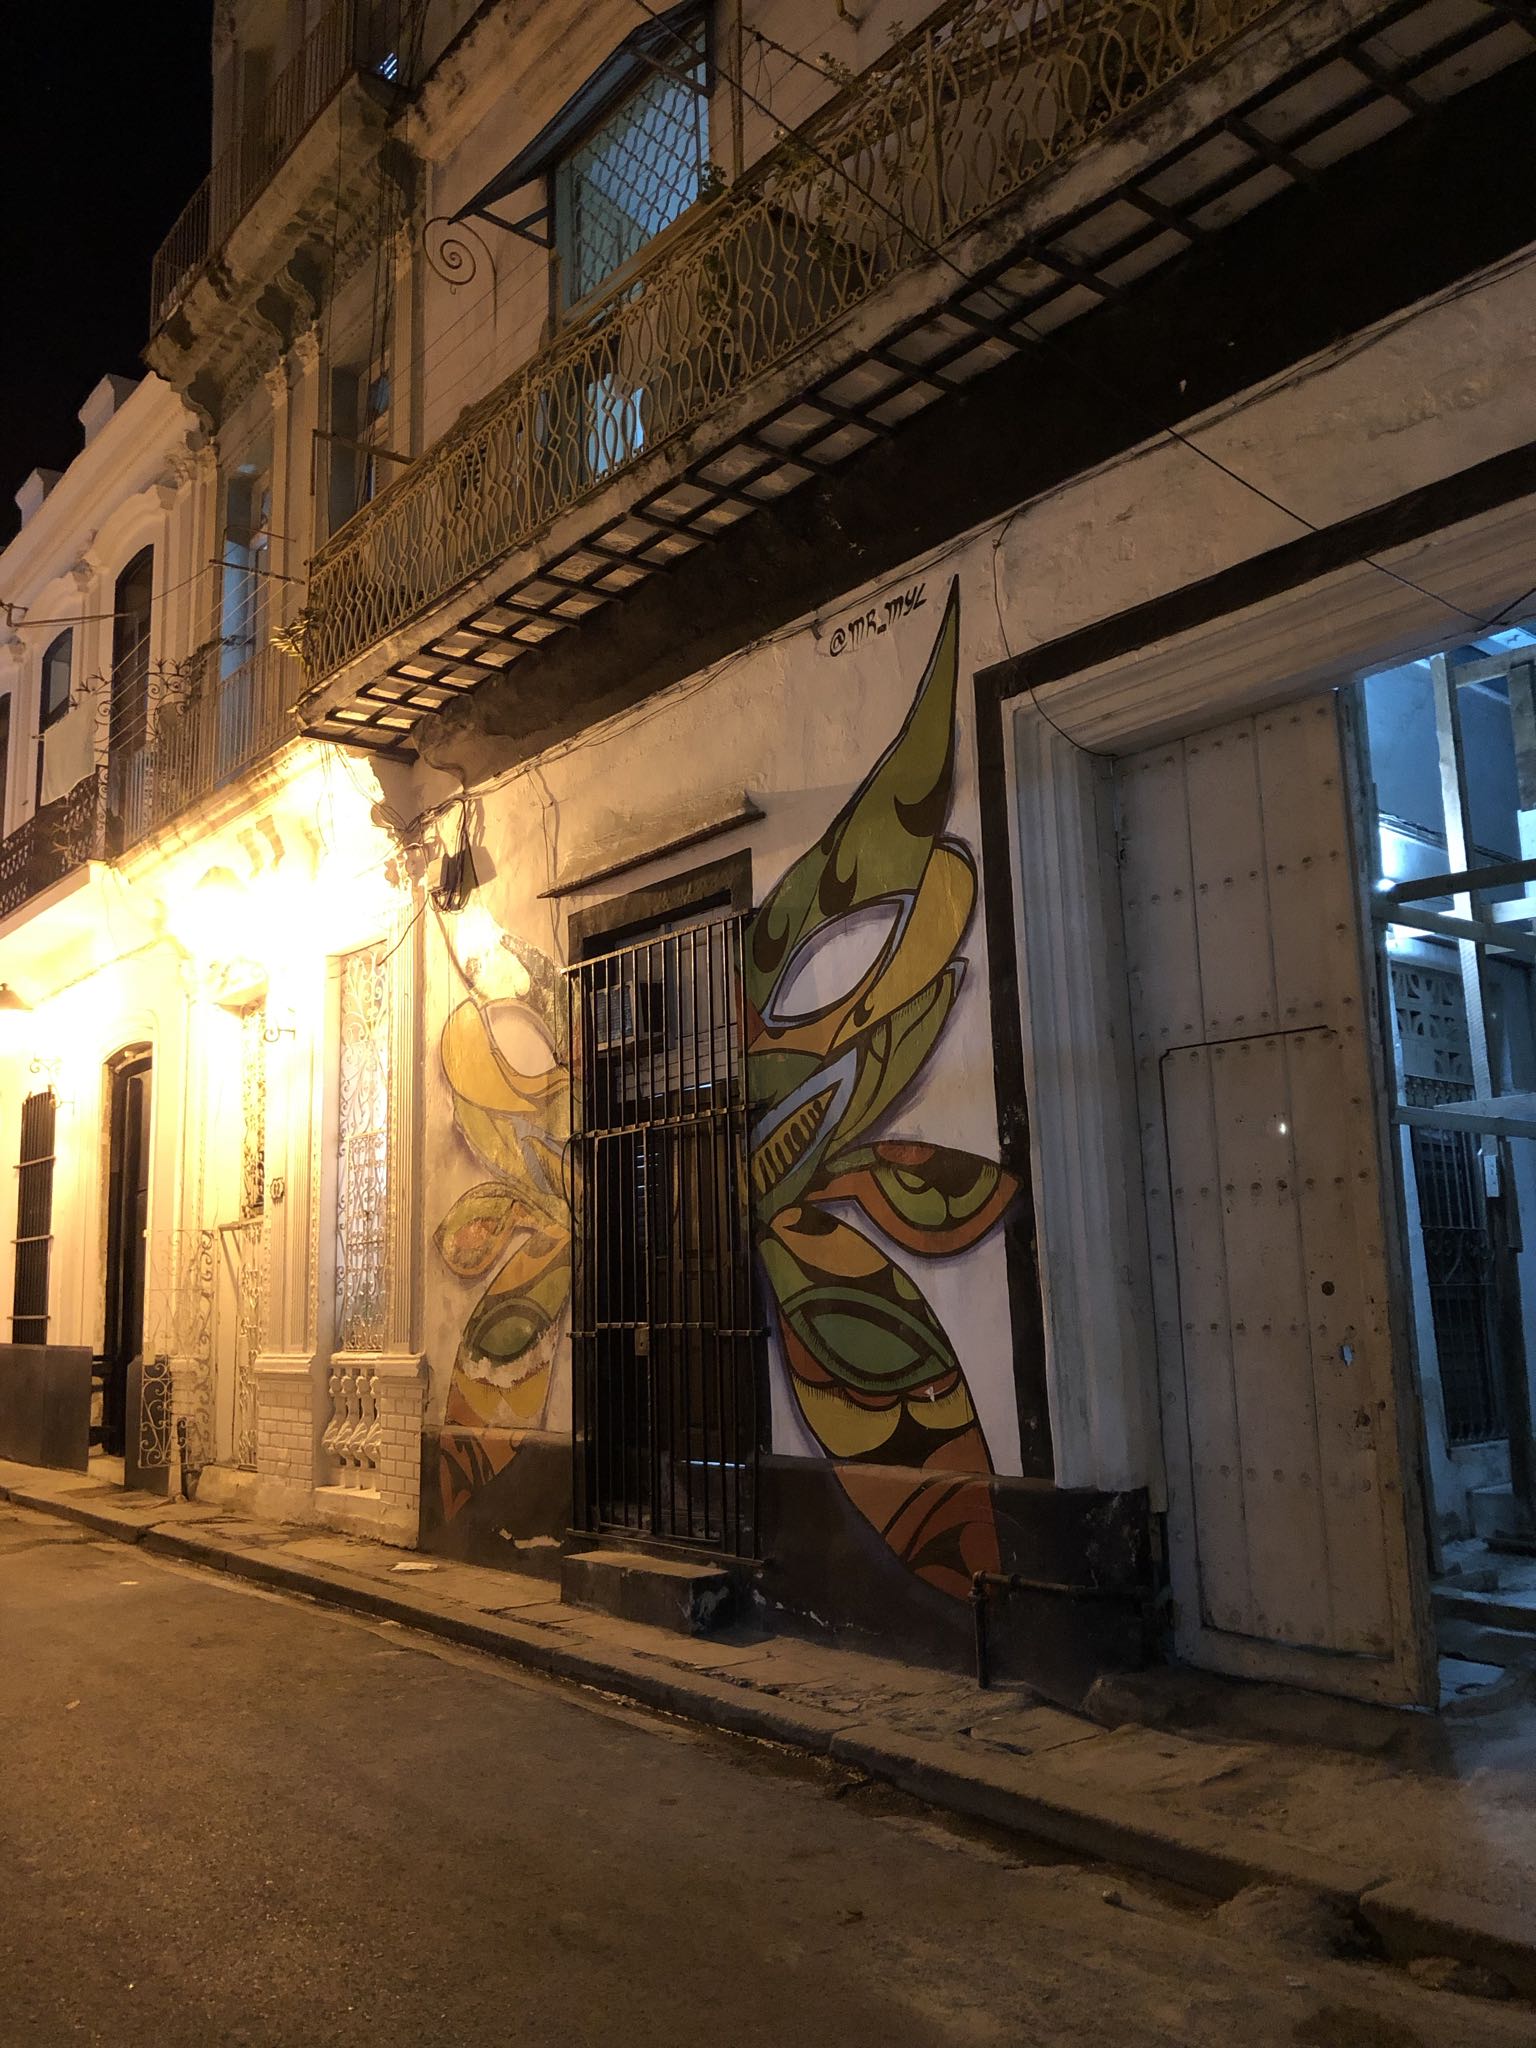 Photo 140 of 221 from the album Highlights Cuba 2019.